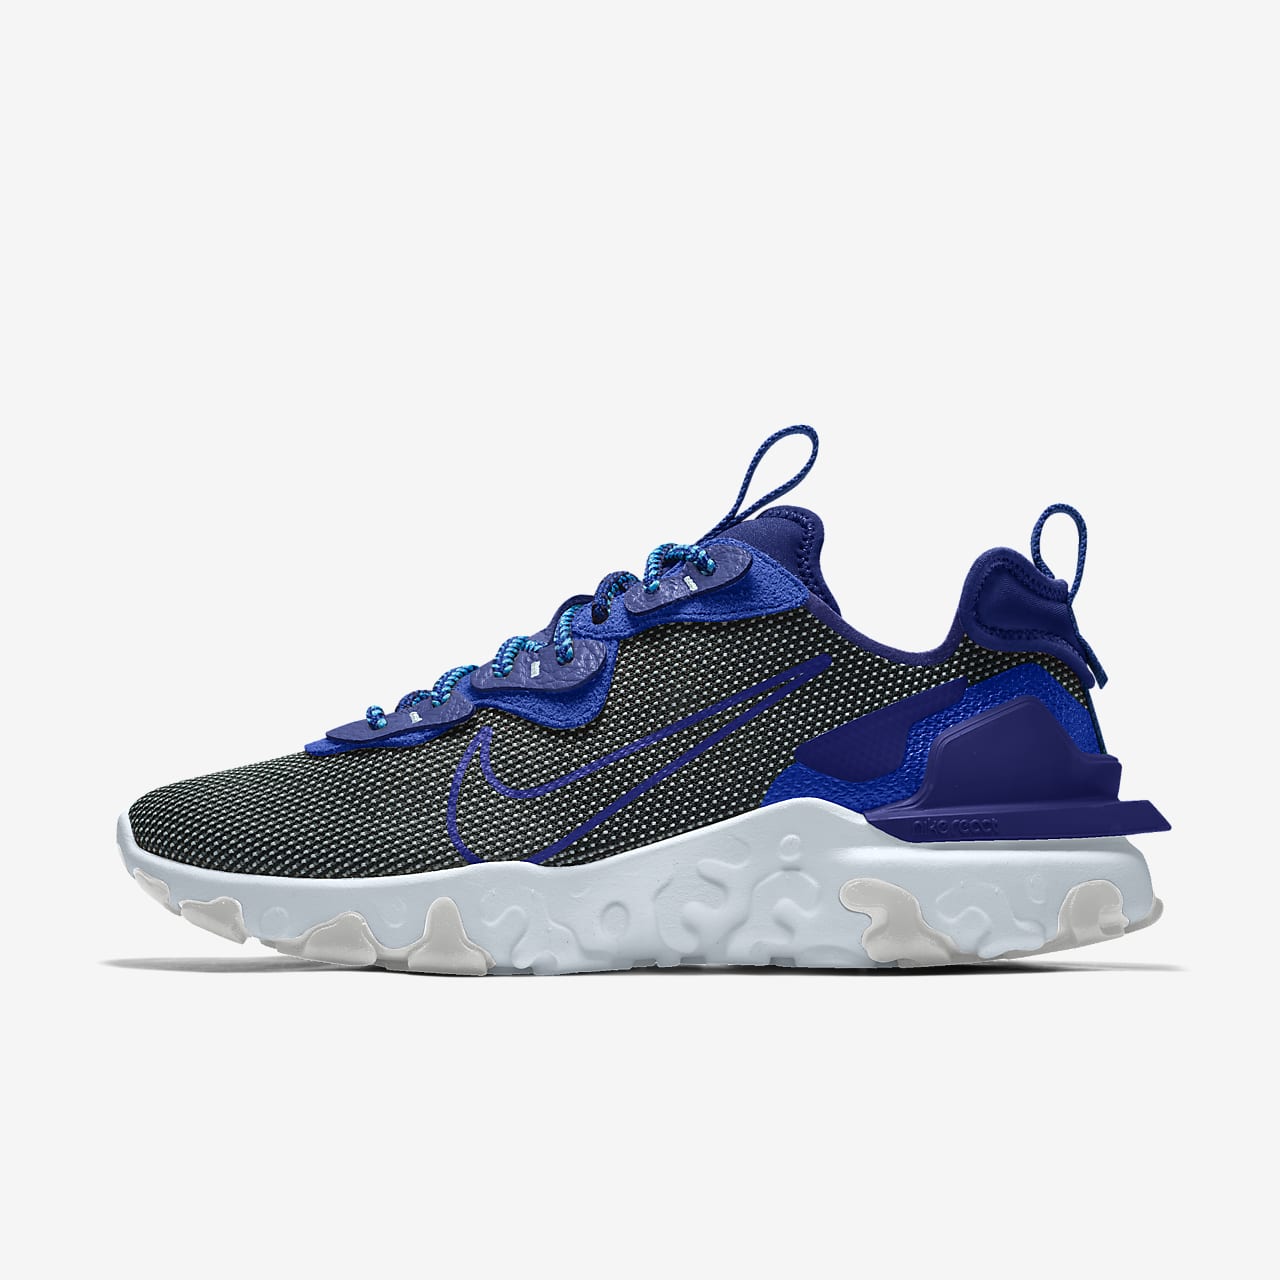 Nike React Vision By You Custom Men's Lifestyle Shoe